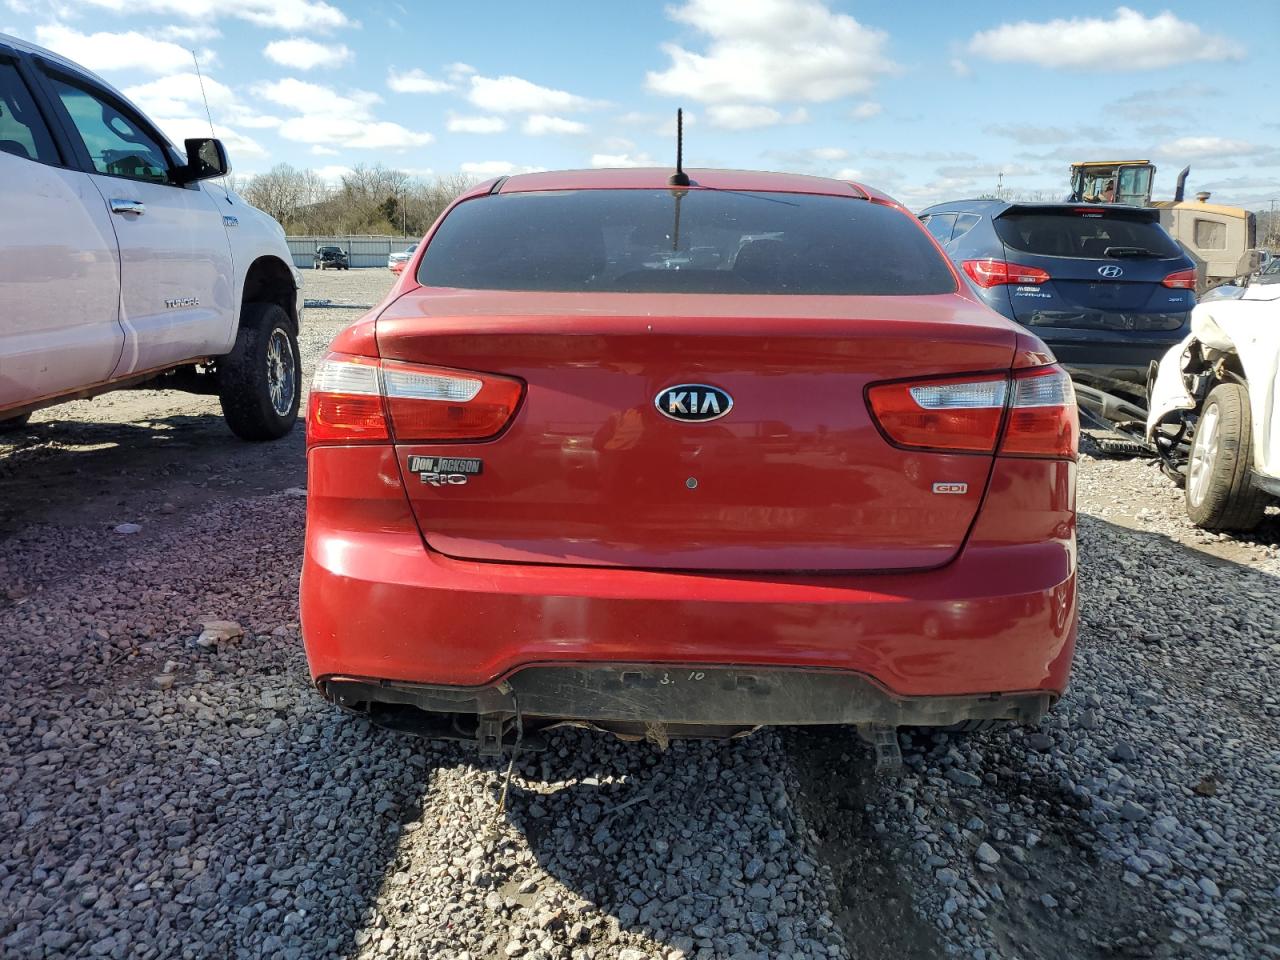 KNADM4A32F6****** Salvage and Repairable 2015 Kia Rio in Alabama State